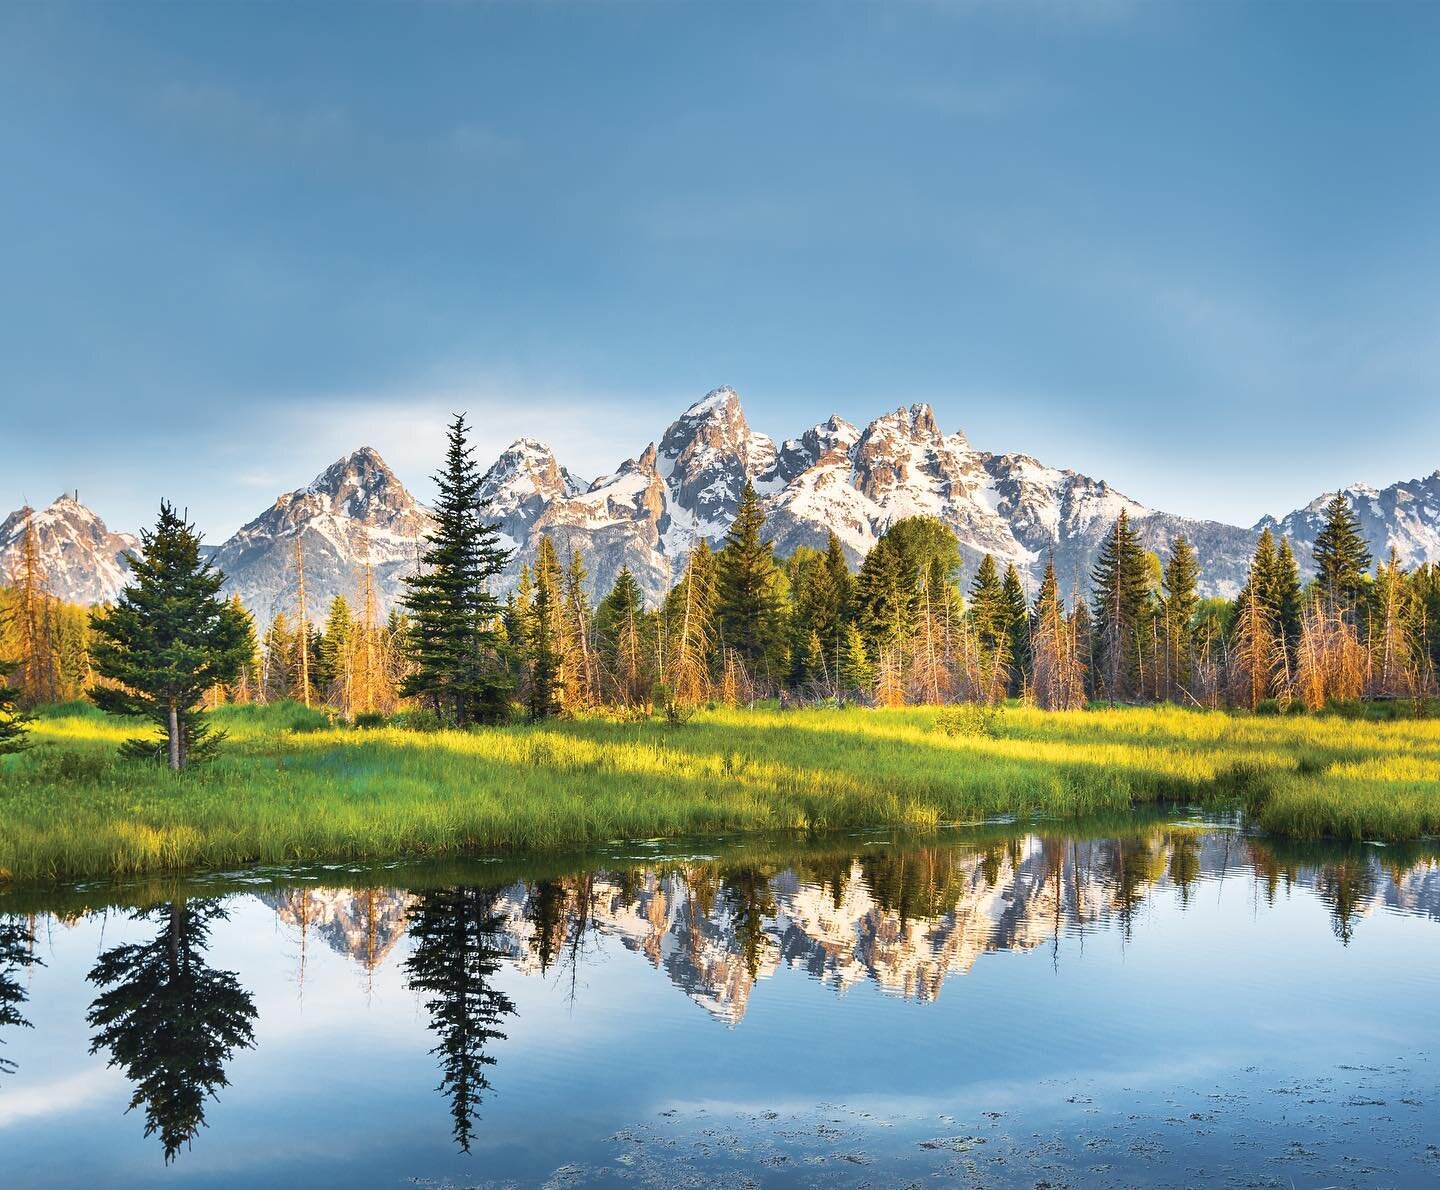 Cisco Group of Jackson Hole Sotheby&rsquo;s International Realty is consistently recognized by RealTrends, ranking in the top 1.5% of agents nationwide. Here are 5 reasons to own in Jackson Hole, Wyoming:
1. No social disturbances
2. 23,000 total cou